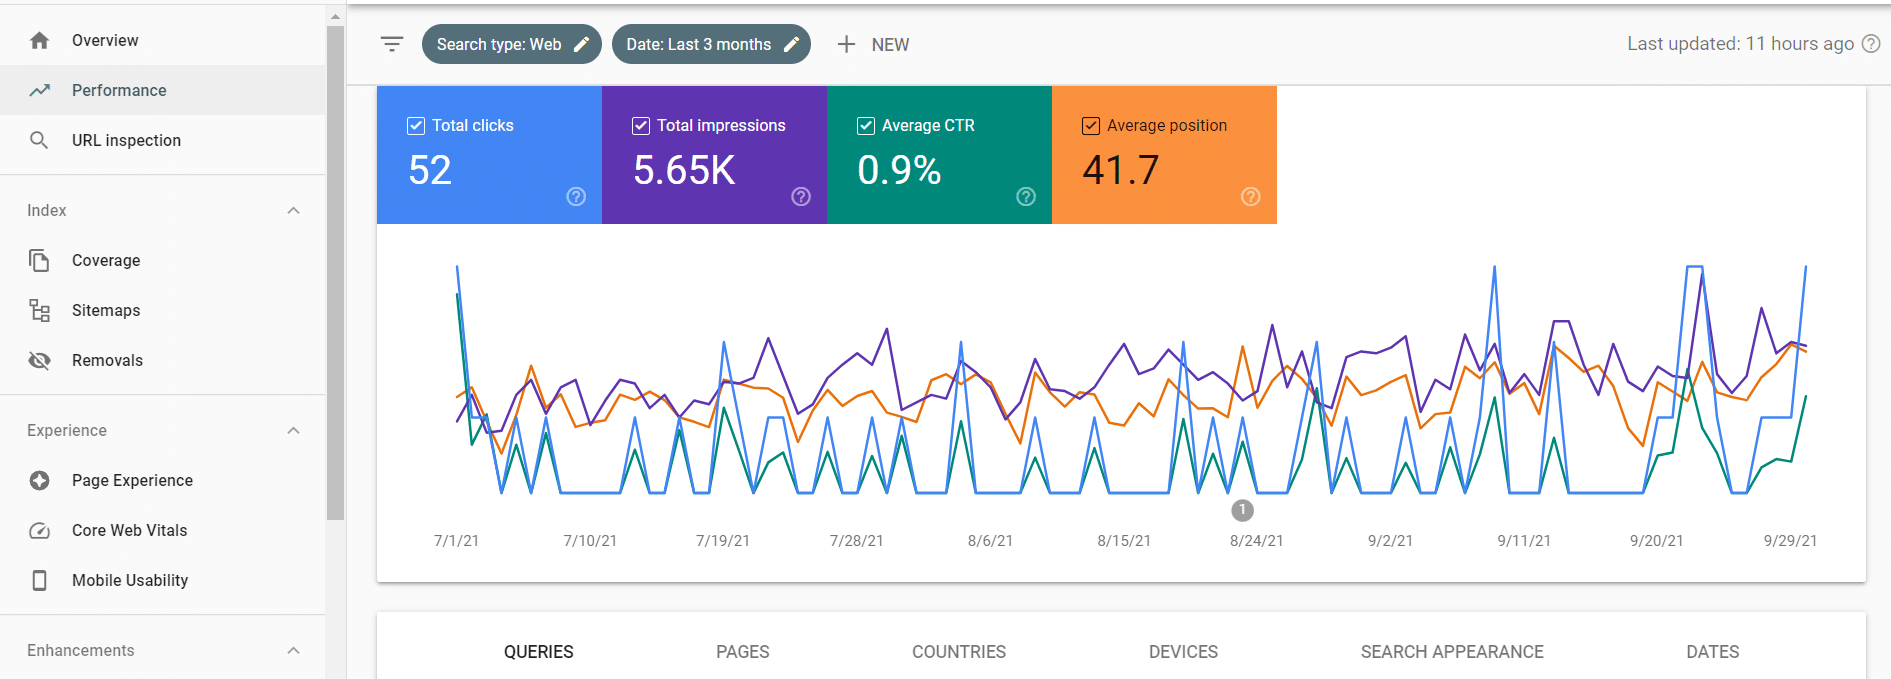 Screenshot of Google Search Console overview page.